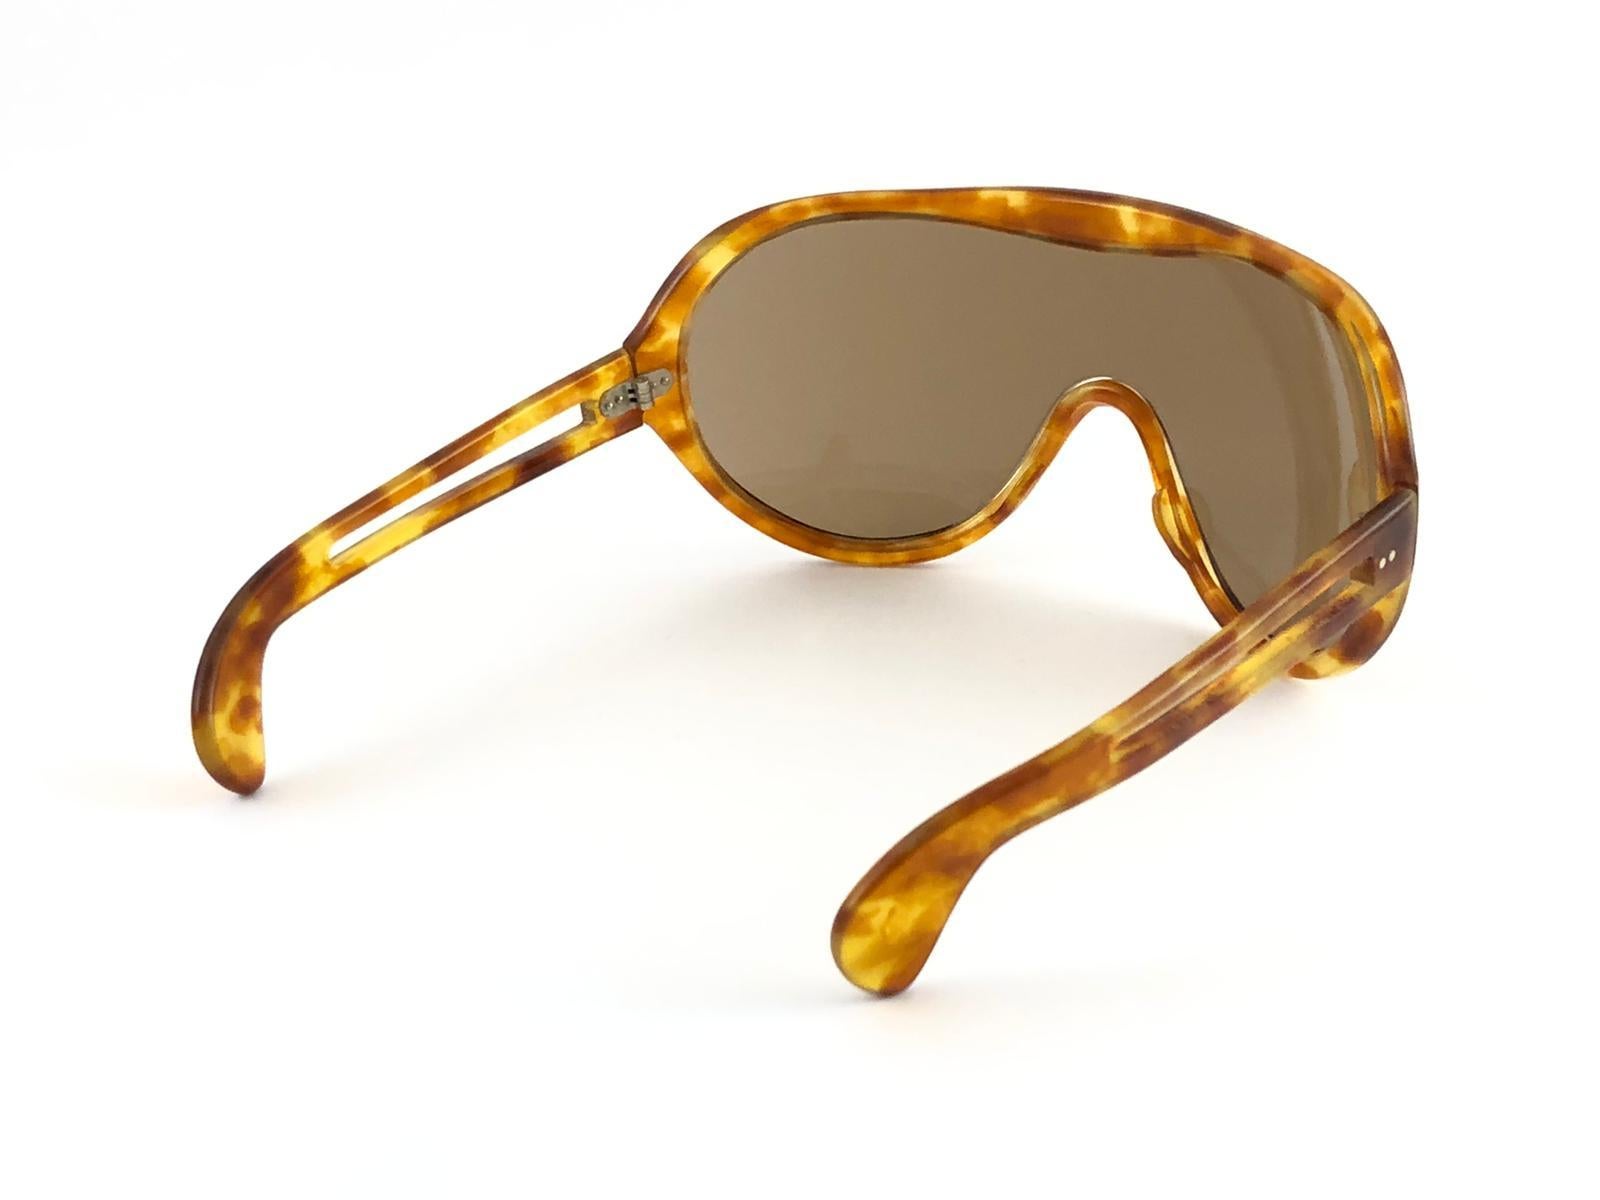 New Rare Vintage Philippe Chevallier Light Tortoise Miles Davis 1960 Sunglasses In New Condition For Sale In Baleares, Baleares